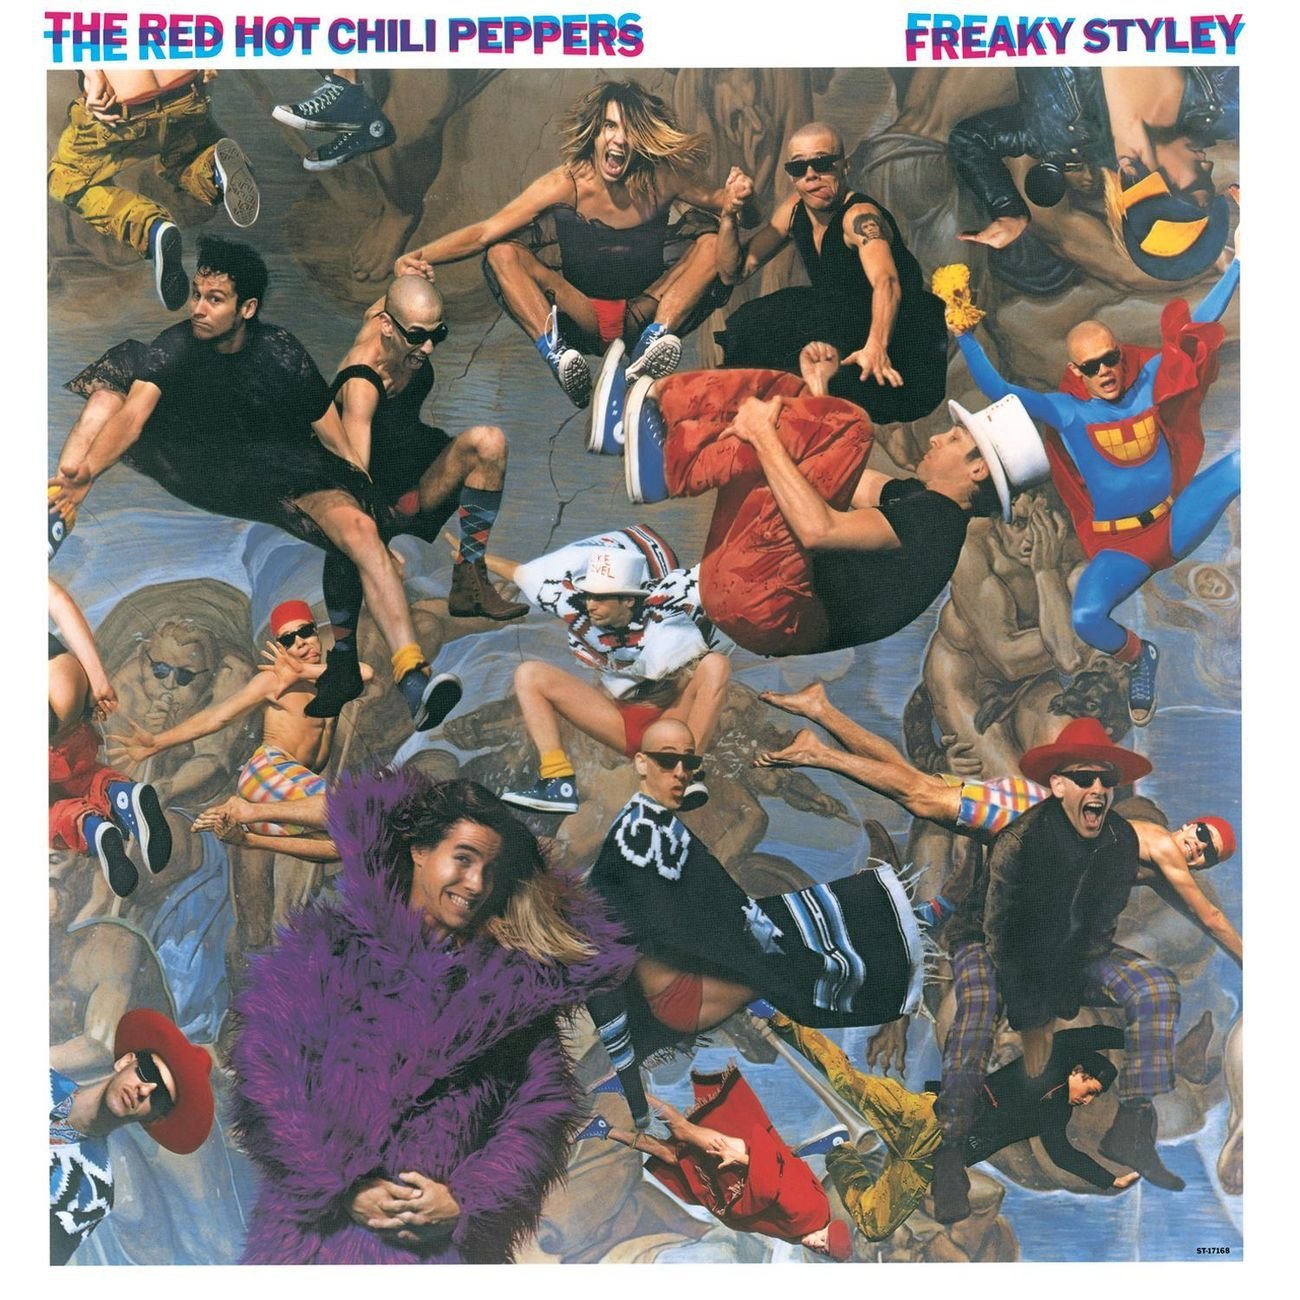 RED HOT CHILI PEPPERS - Freaky Styley cover 